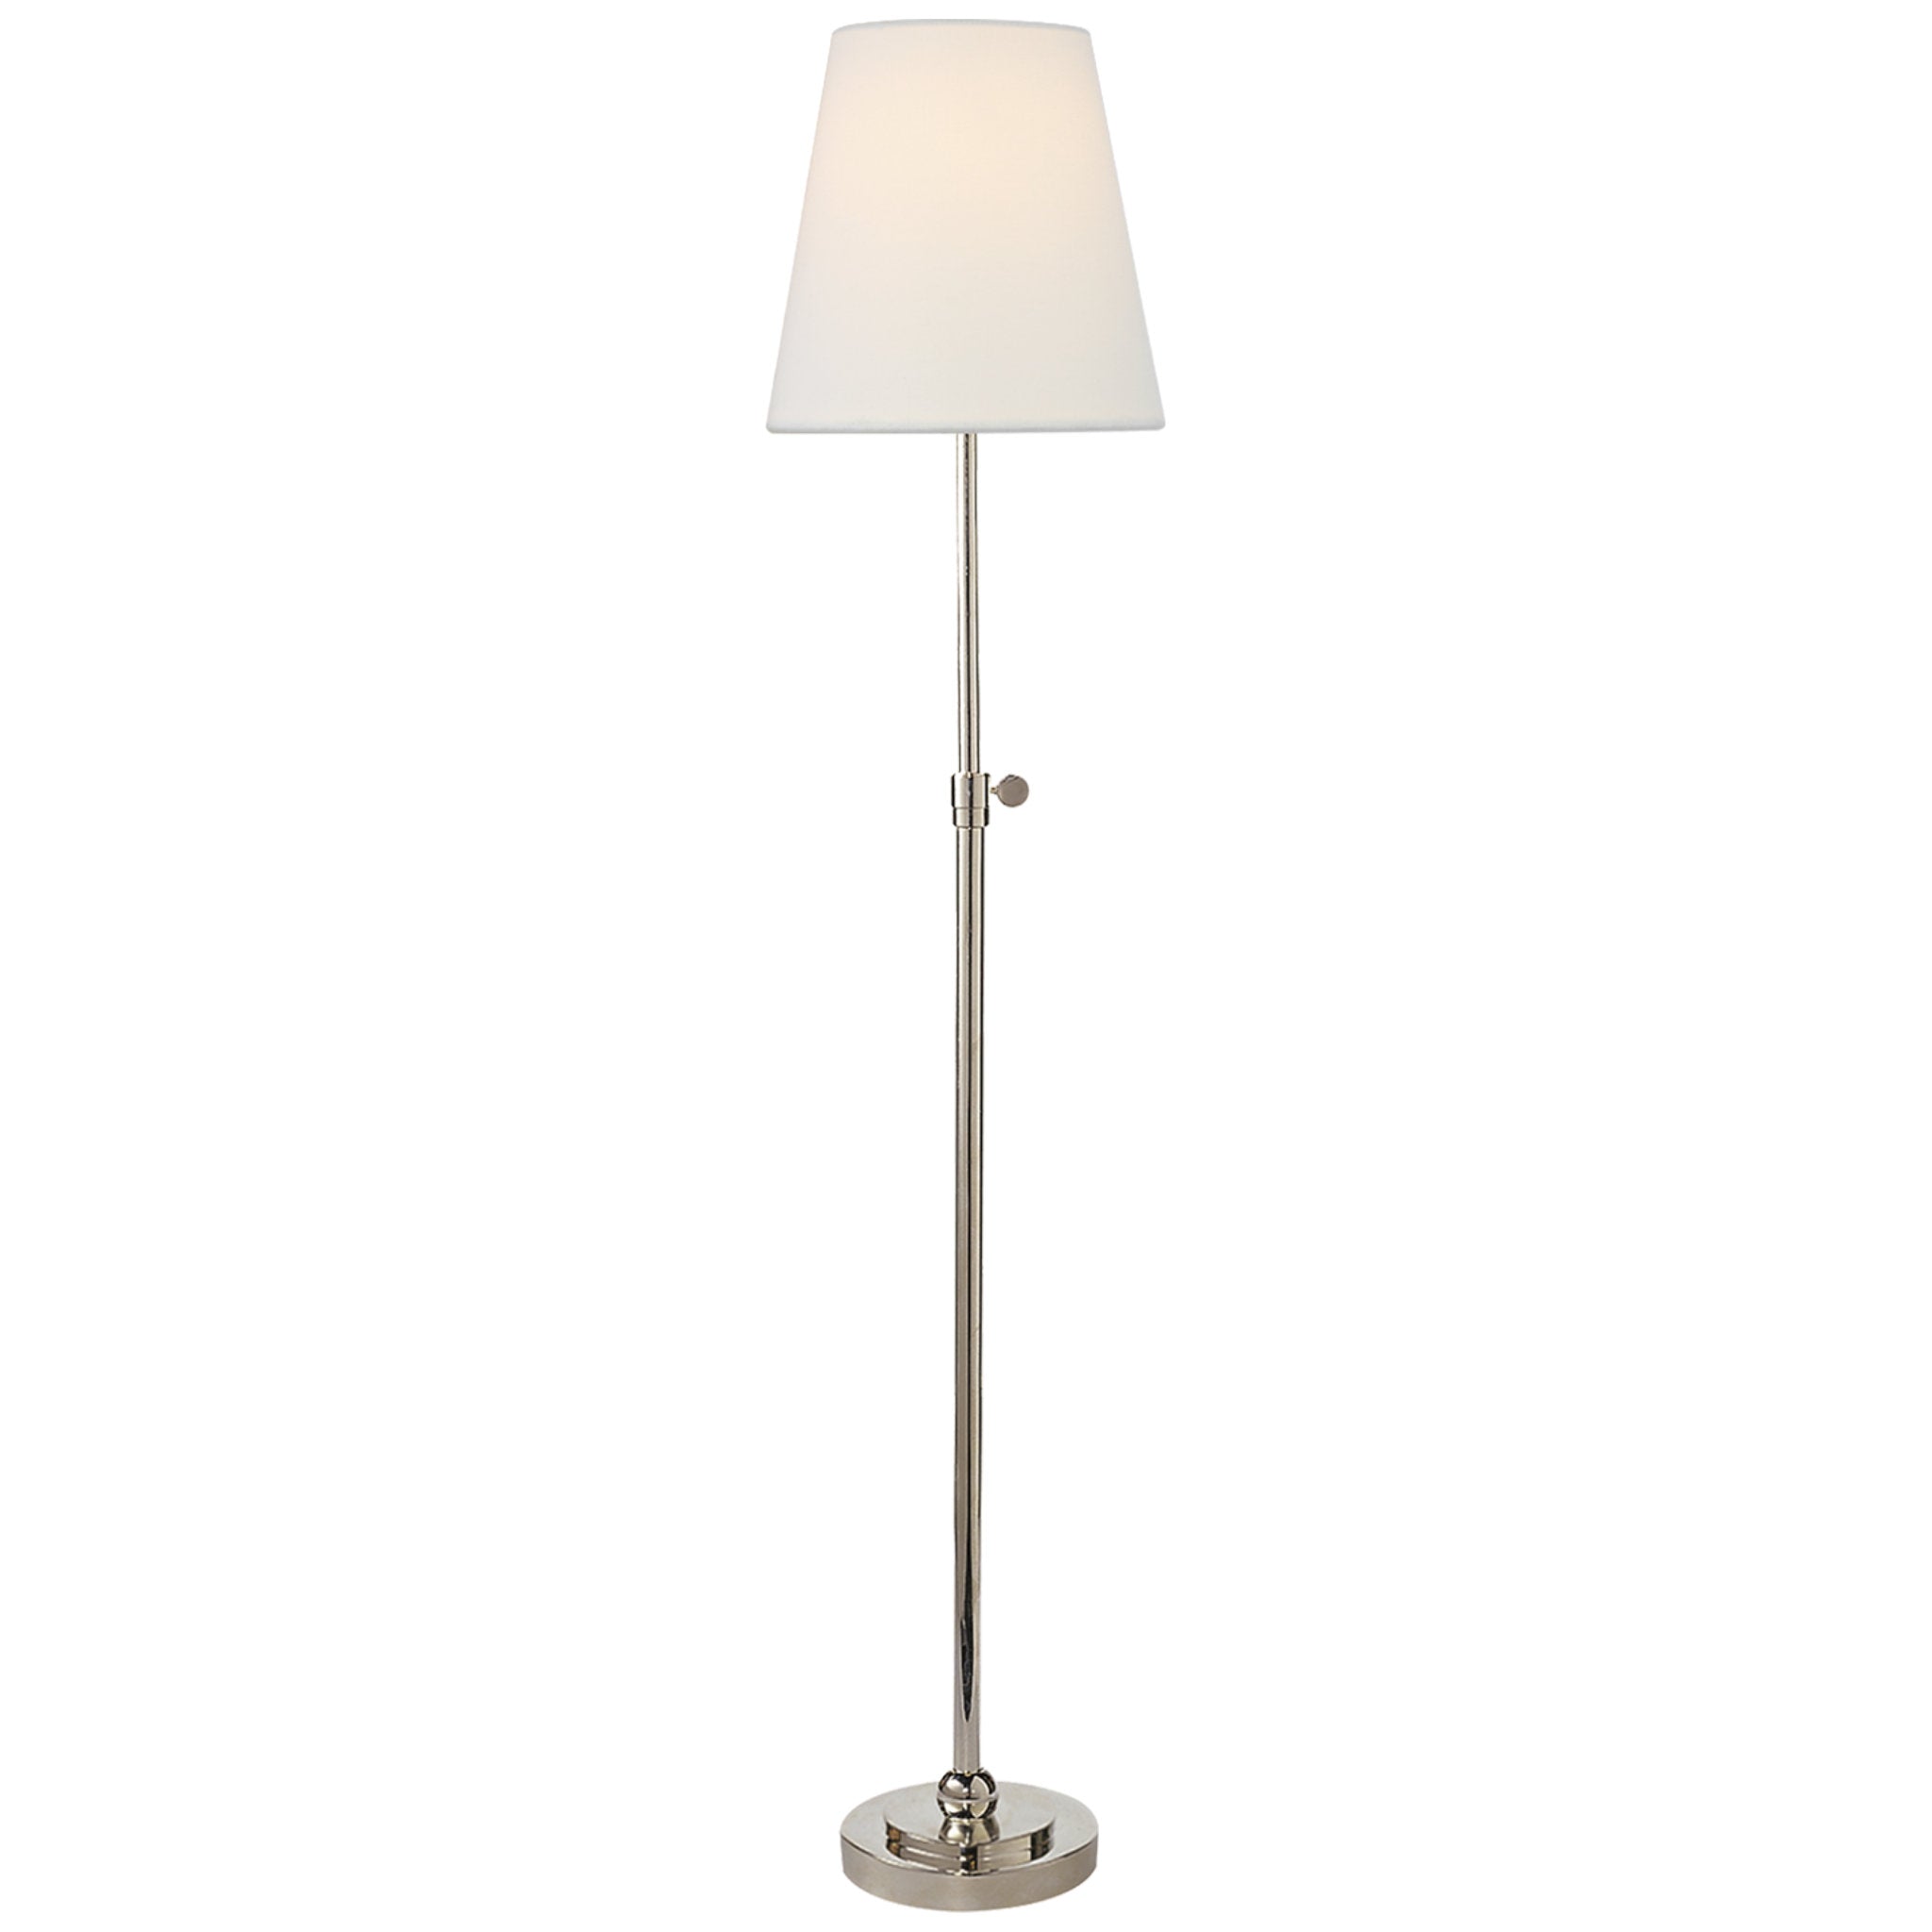 Thomas O'Brien Bryant Table Lamp in Polished Nickel with Linen Shade